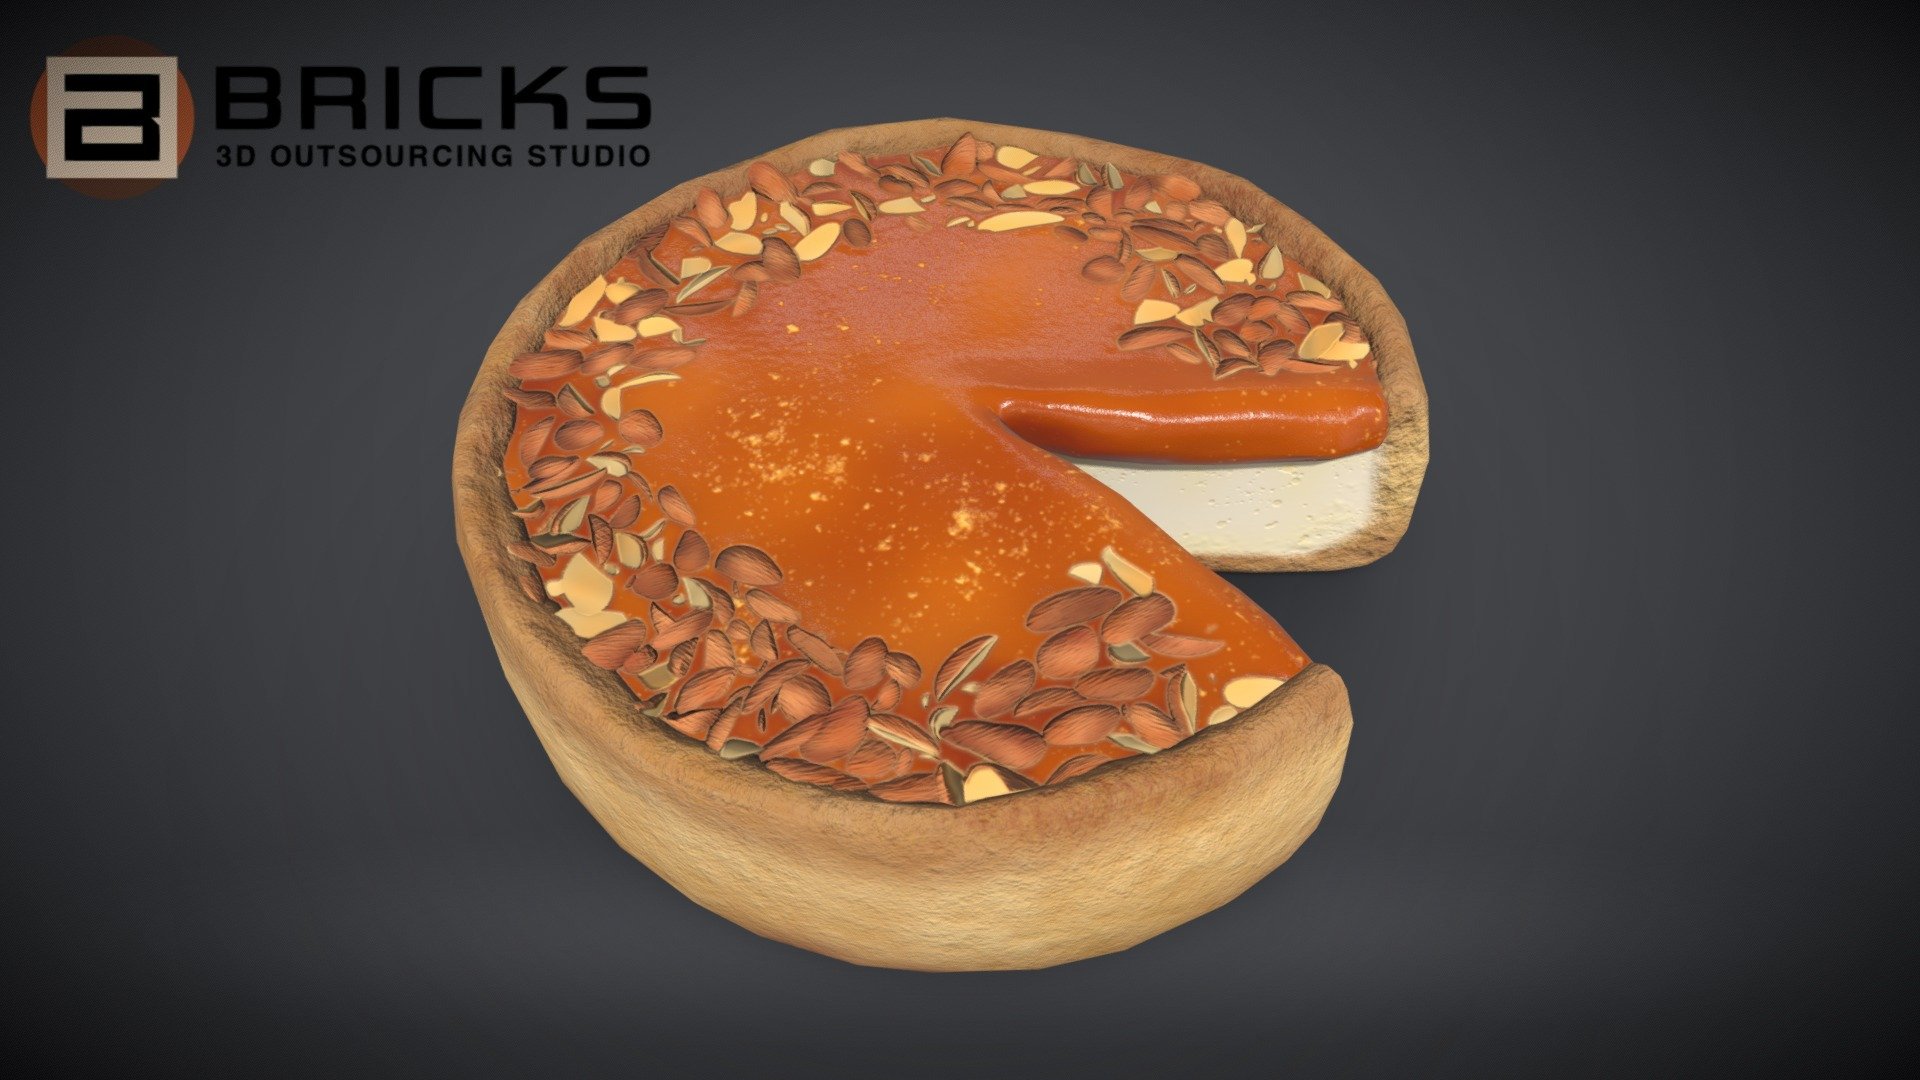 PBR Food Asset:
CheesecakeCaramelChart
Polycount: 1402
Vertex count: 703
Texture Size: 2048px x 2048px
Normal: OpenGL

If you need any adjust in file please contact us: team@bricks3dstudio.com

Hire us: tringuyen@bricks3dstudio.com
Here is us: https://www.bricks3dstudio.com/
        https://www.artstation.com/bricksstudio
        https://www.facebook.com/Bricks3dstudio/
        https://www.linkedin.com/in/bricks-studio-b10462252/ - CheesecakeCaramelChart - Buy Royalty Free 3D model by Bricks Studio (@bricks3dstudio) 3d model